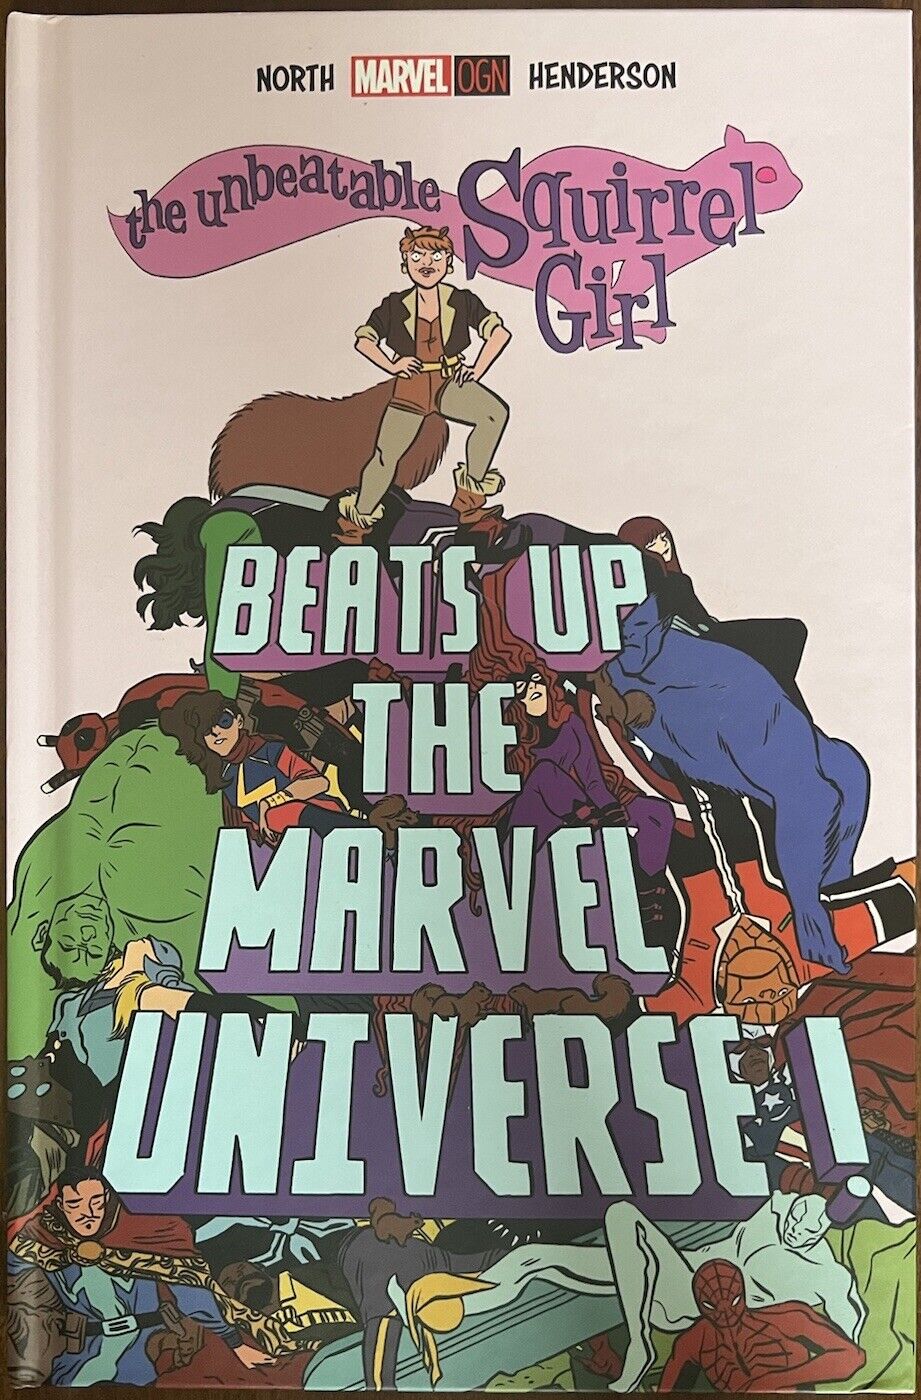 The Unbeatable Squirrel Girl Beats Up the Marvel Universe (Marvel, HC, 2016)